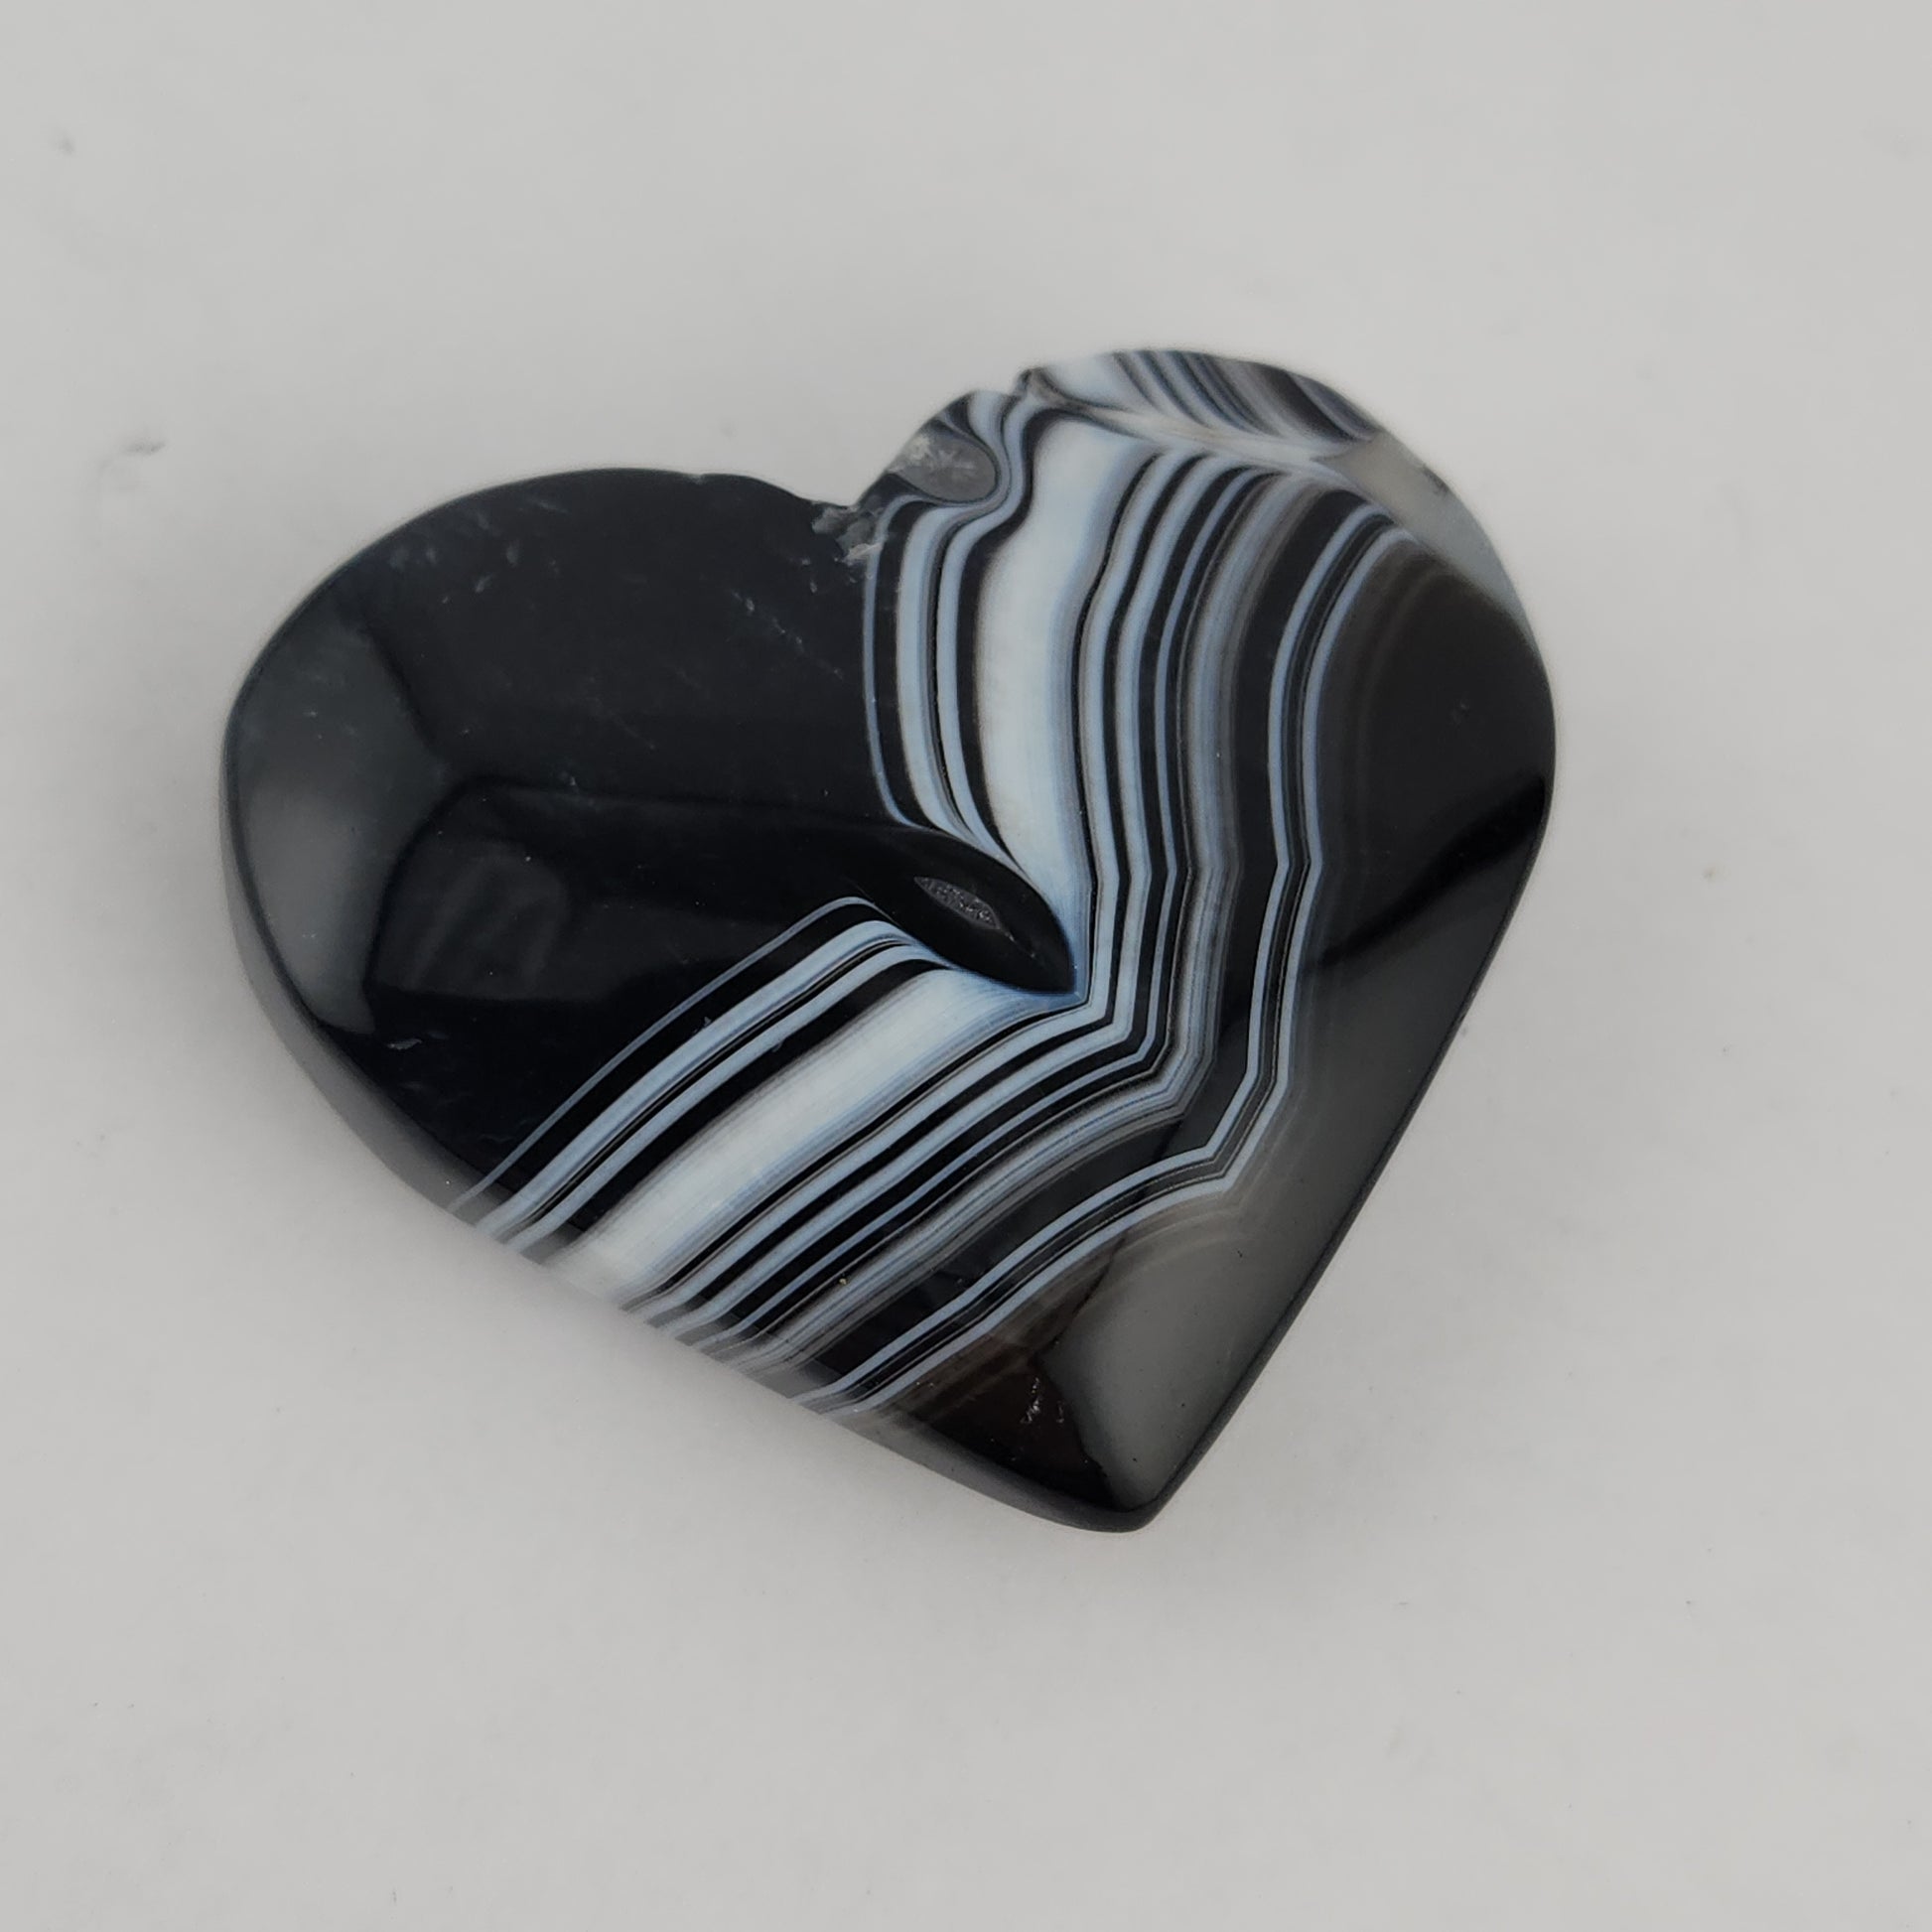 Black sardonyx hearts available at wholesale and retail prices, only at our crystal shop in San Diego!